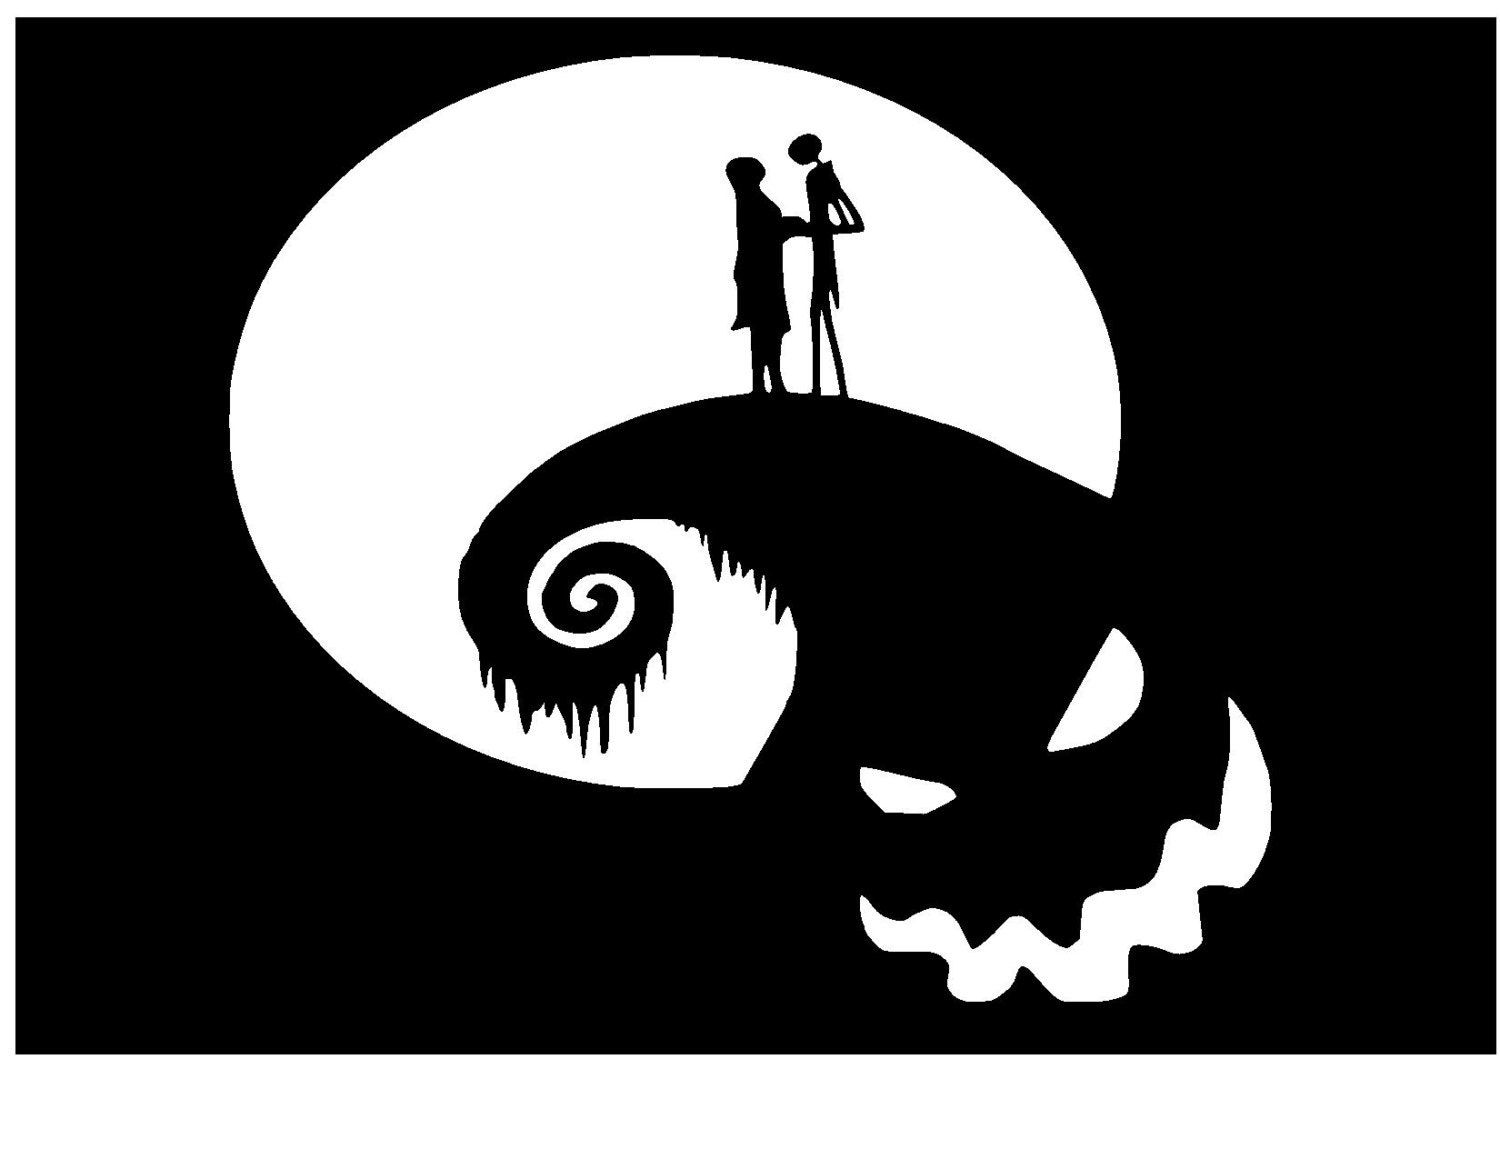 These are 15 Images about Disney Oogie Boogie nightmare before Christmas Fr...